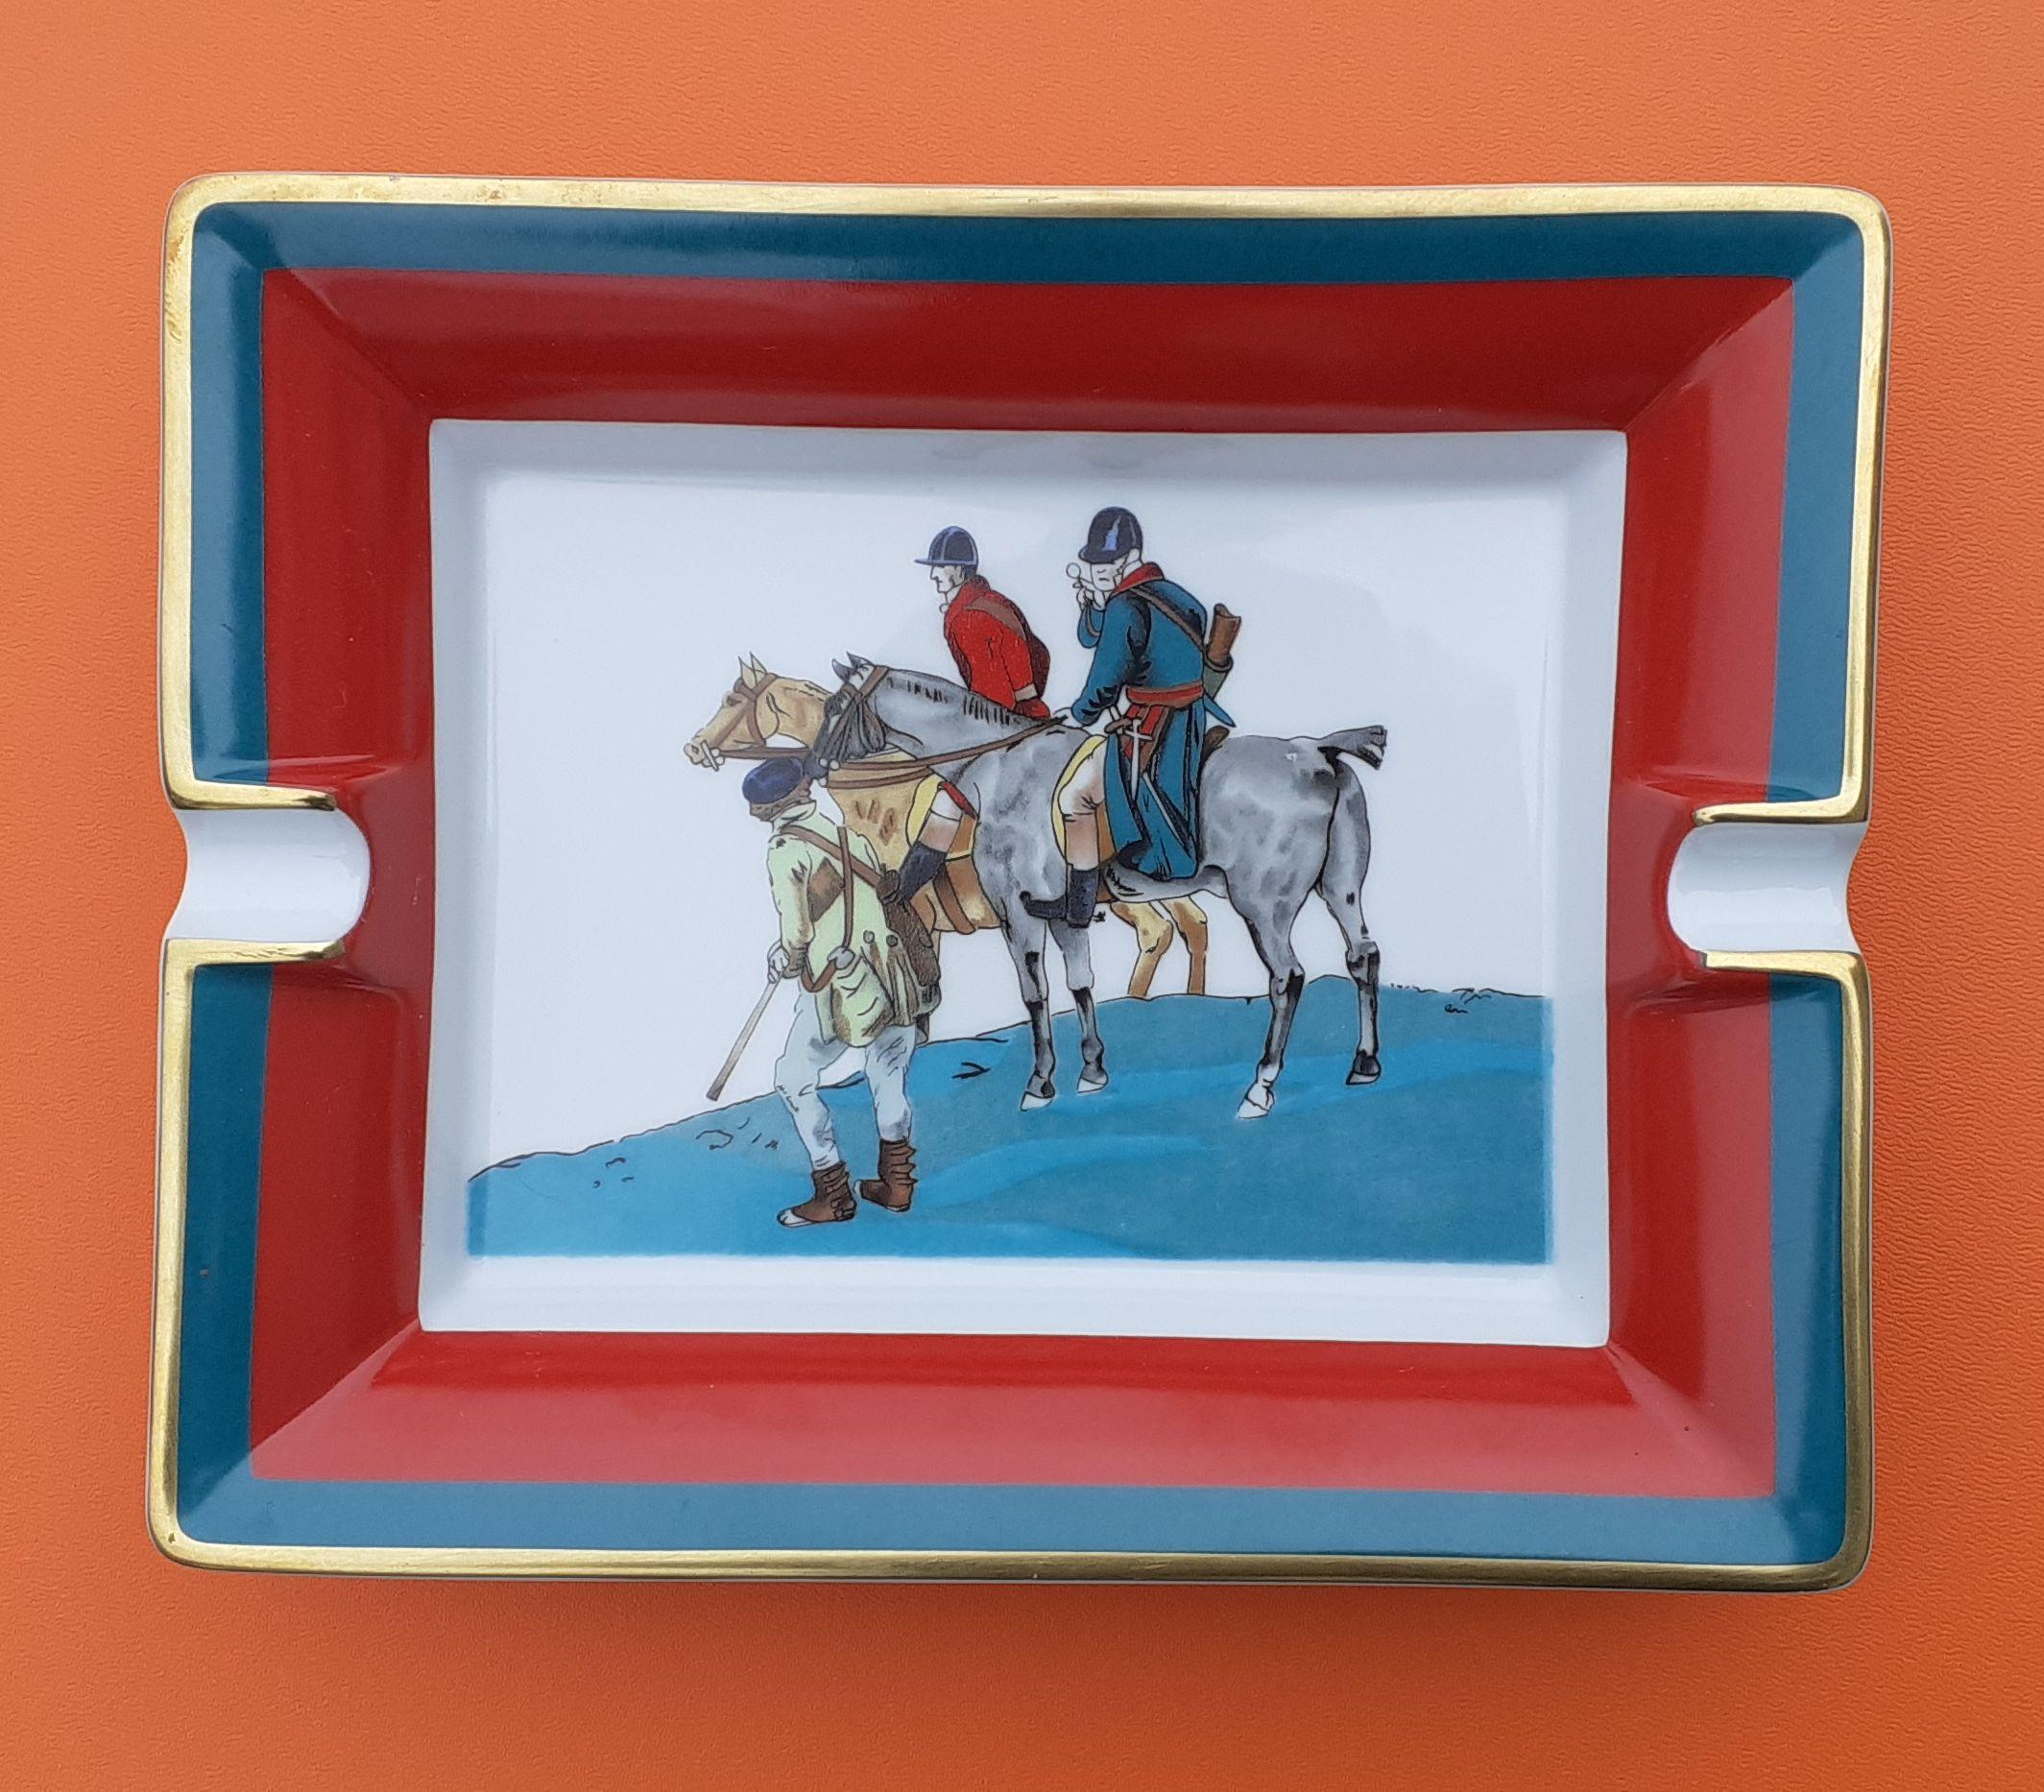 Rare and Beautiful Authentic Hermès Ashtray

Pattern: Hunting with hounds / Horse Hunt

Made in France

Made of printed porcelain and golden edges

Bottom covered with green leather

Colorways: Red, Green, White

